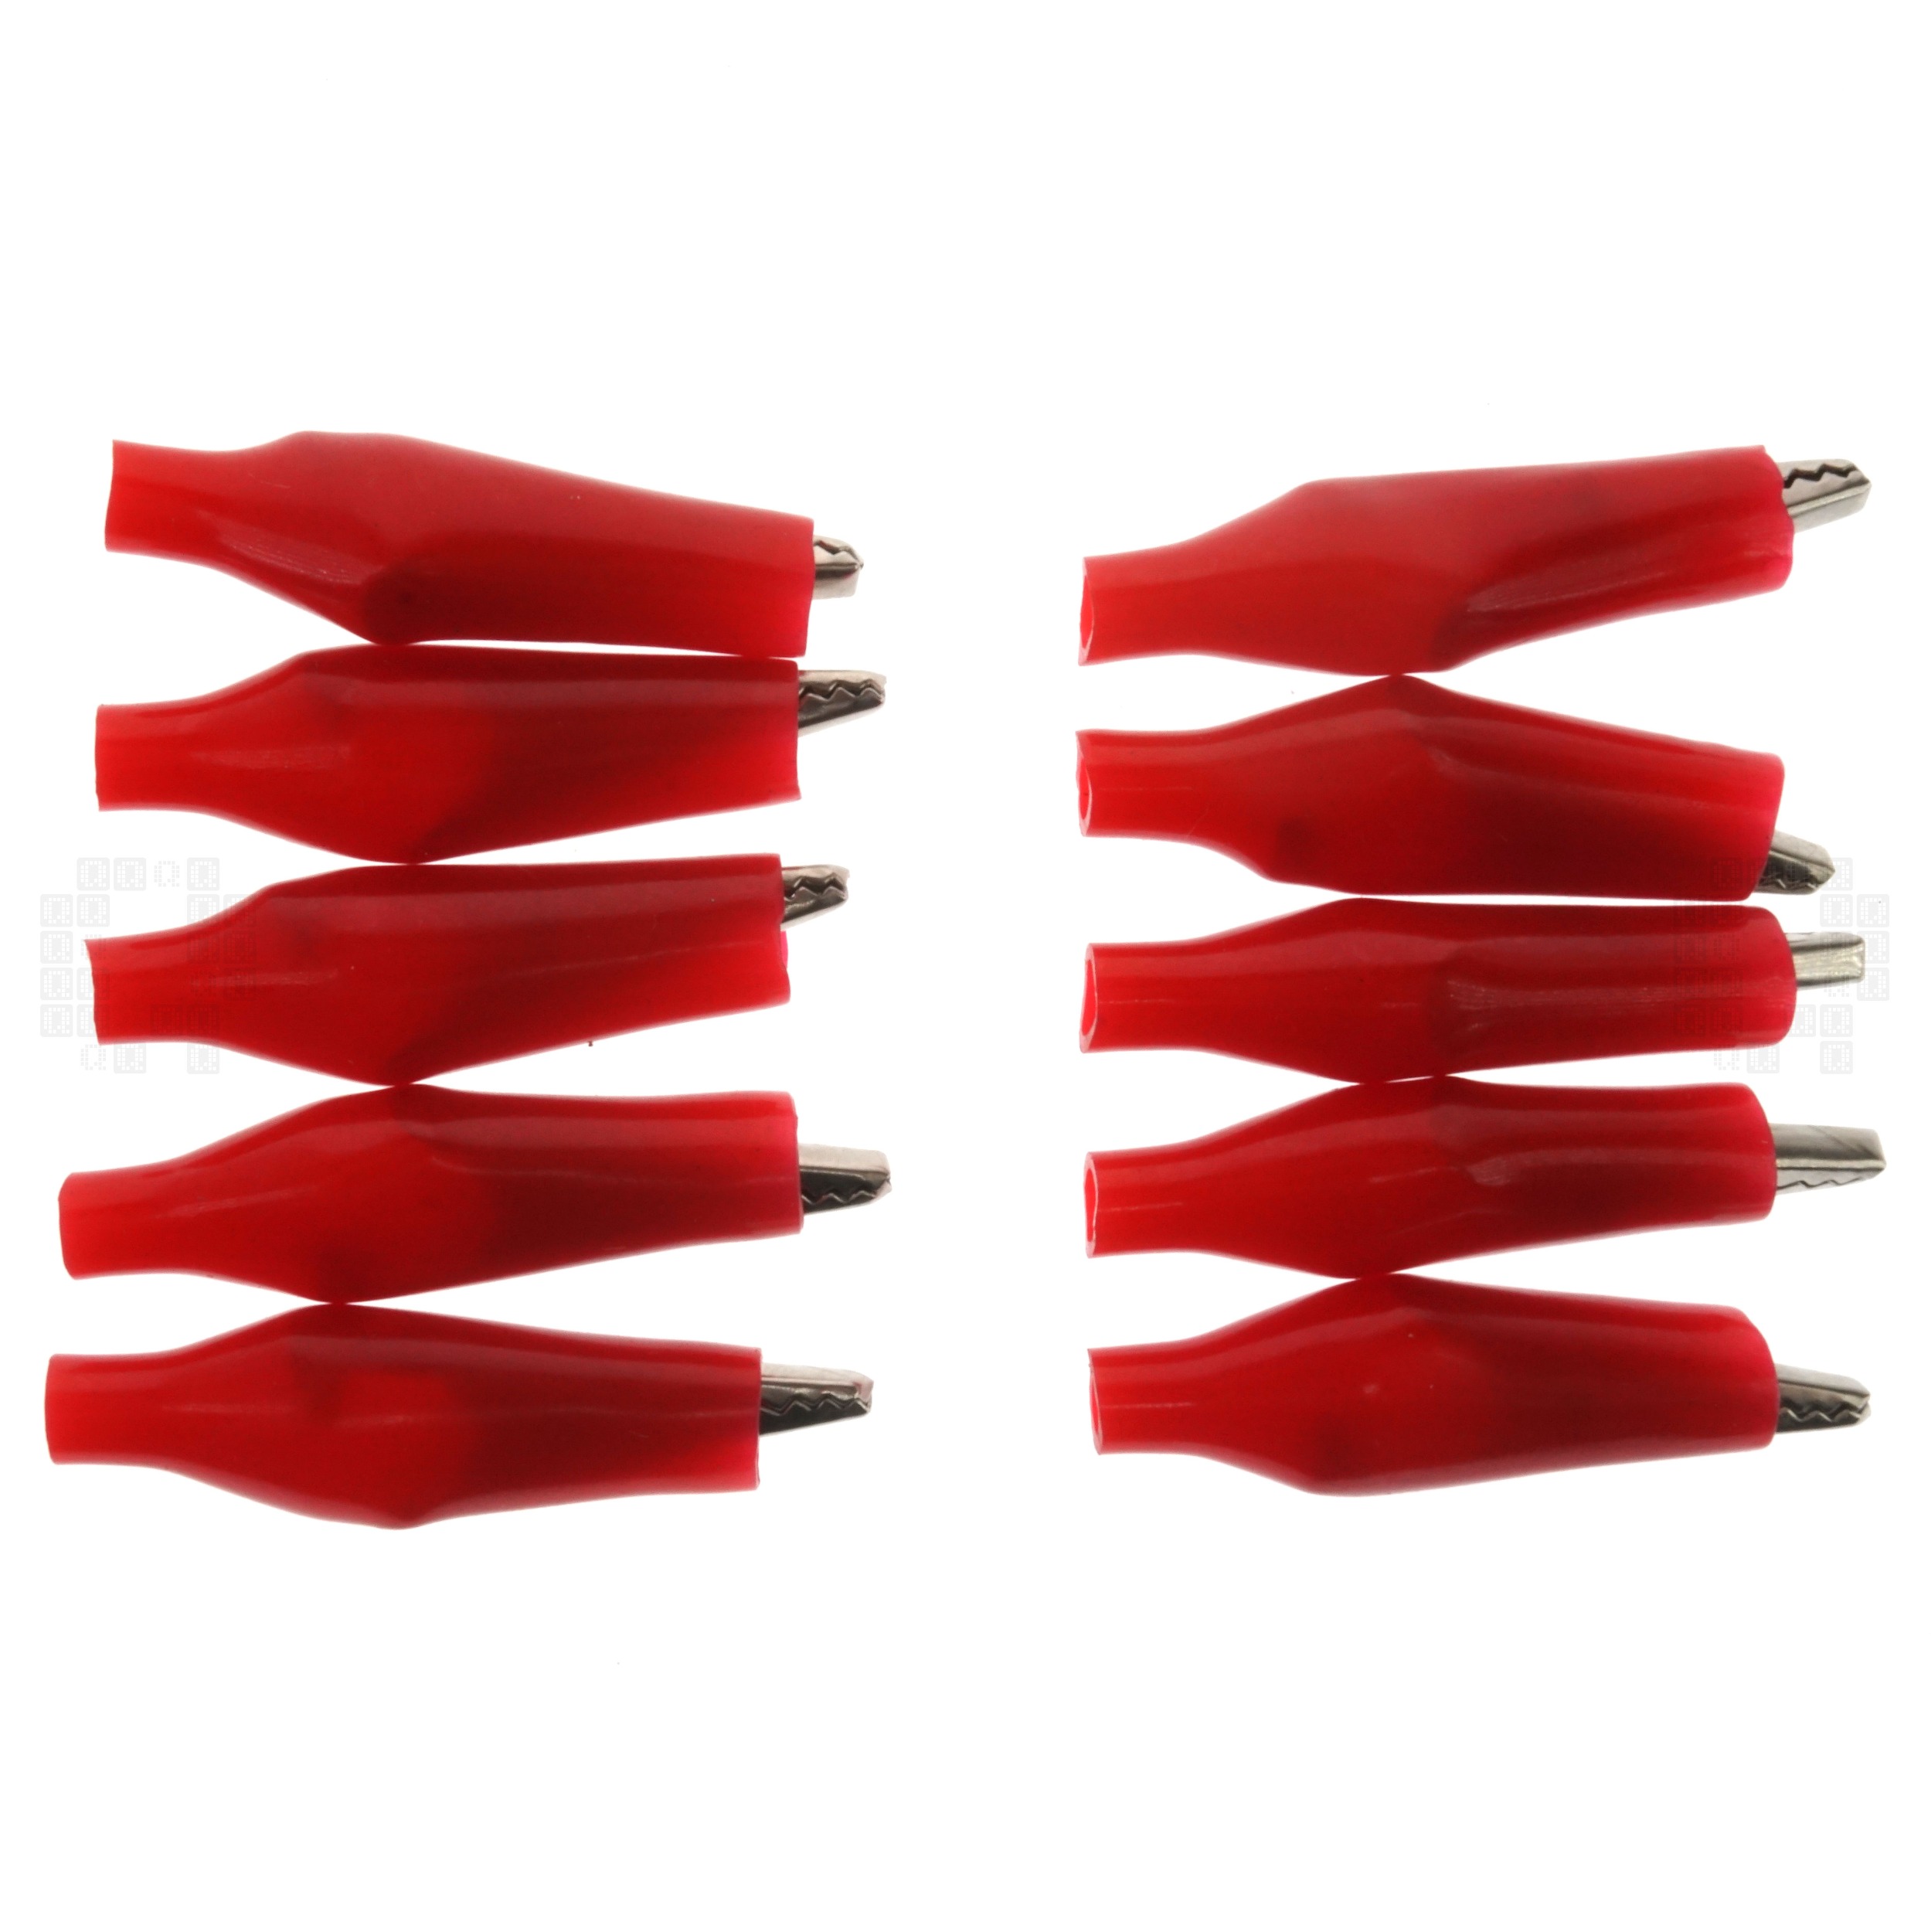 Earu 28mm Alligator Electrical Clamp Clips, Red, 10-Pack